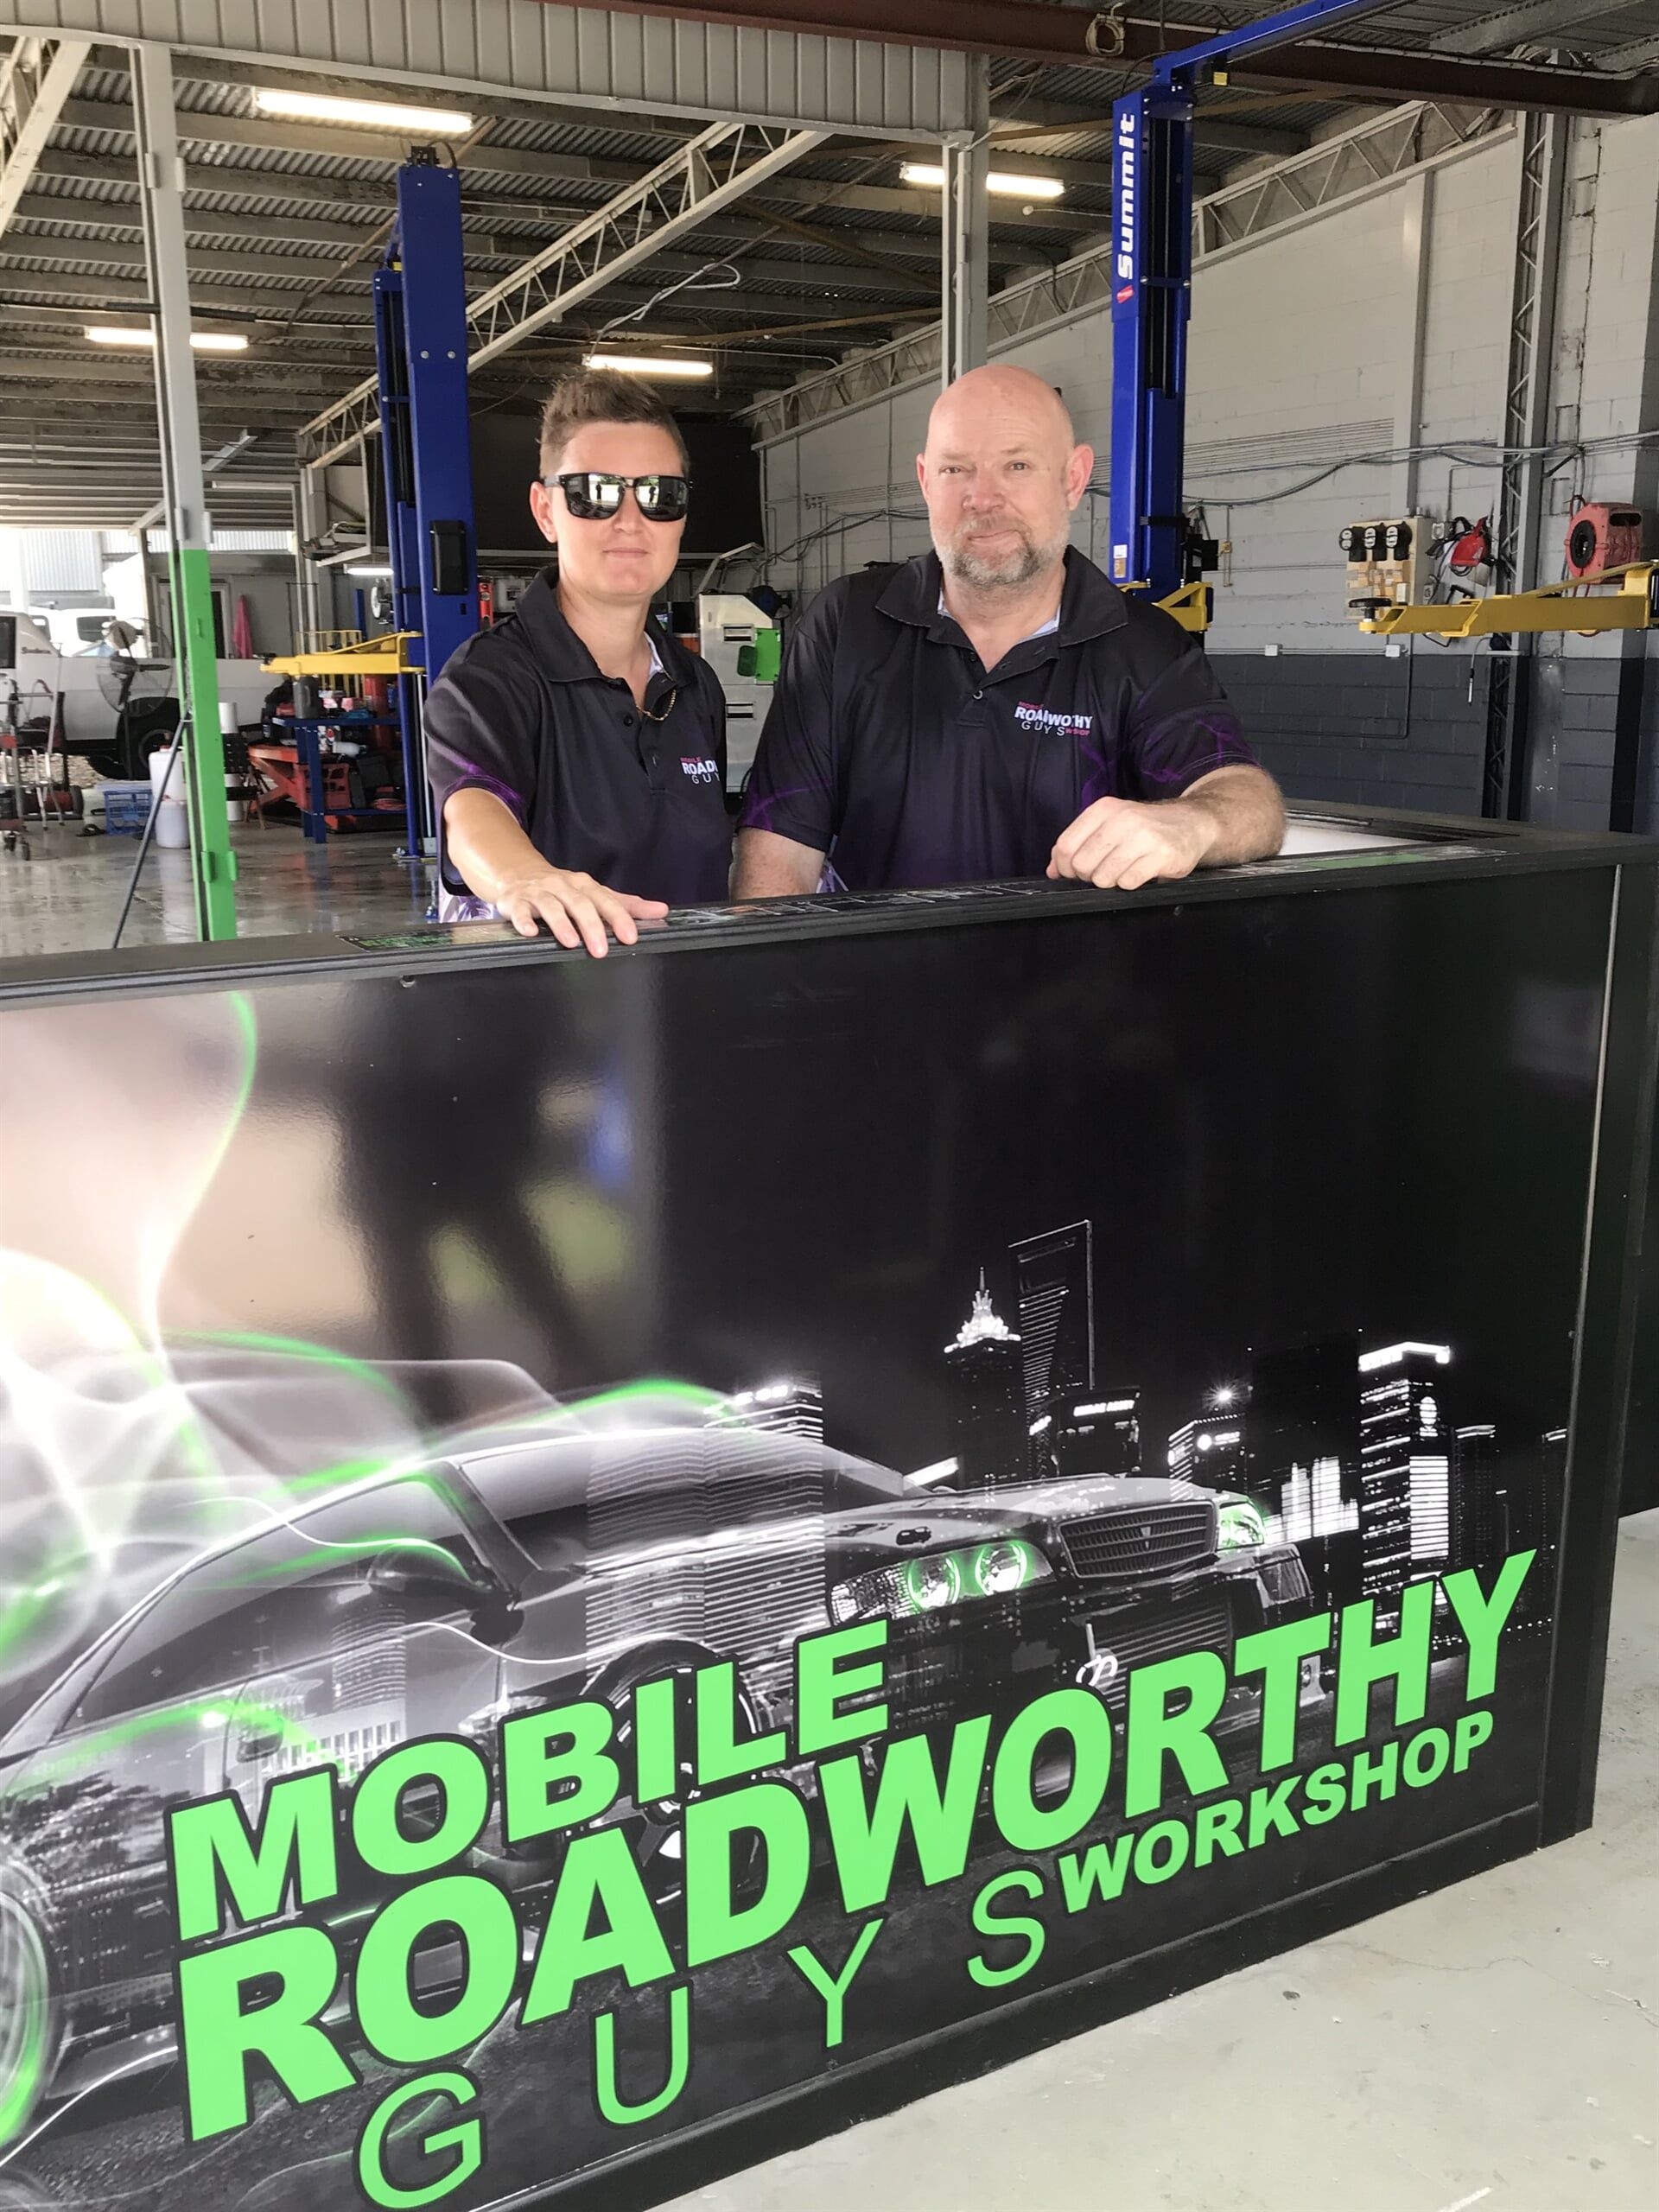 Our mechanics in the workshop — Mobile Roadworthy Guys Townsville in Aitkenvale, QLD